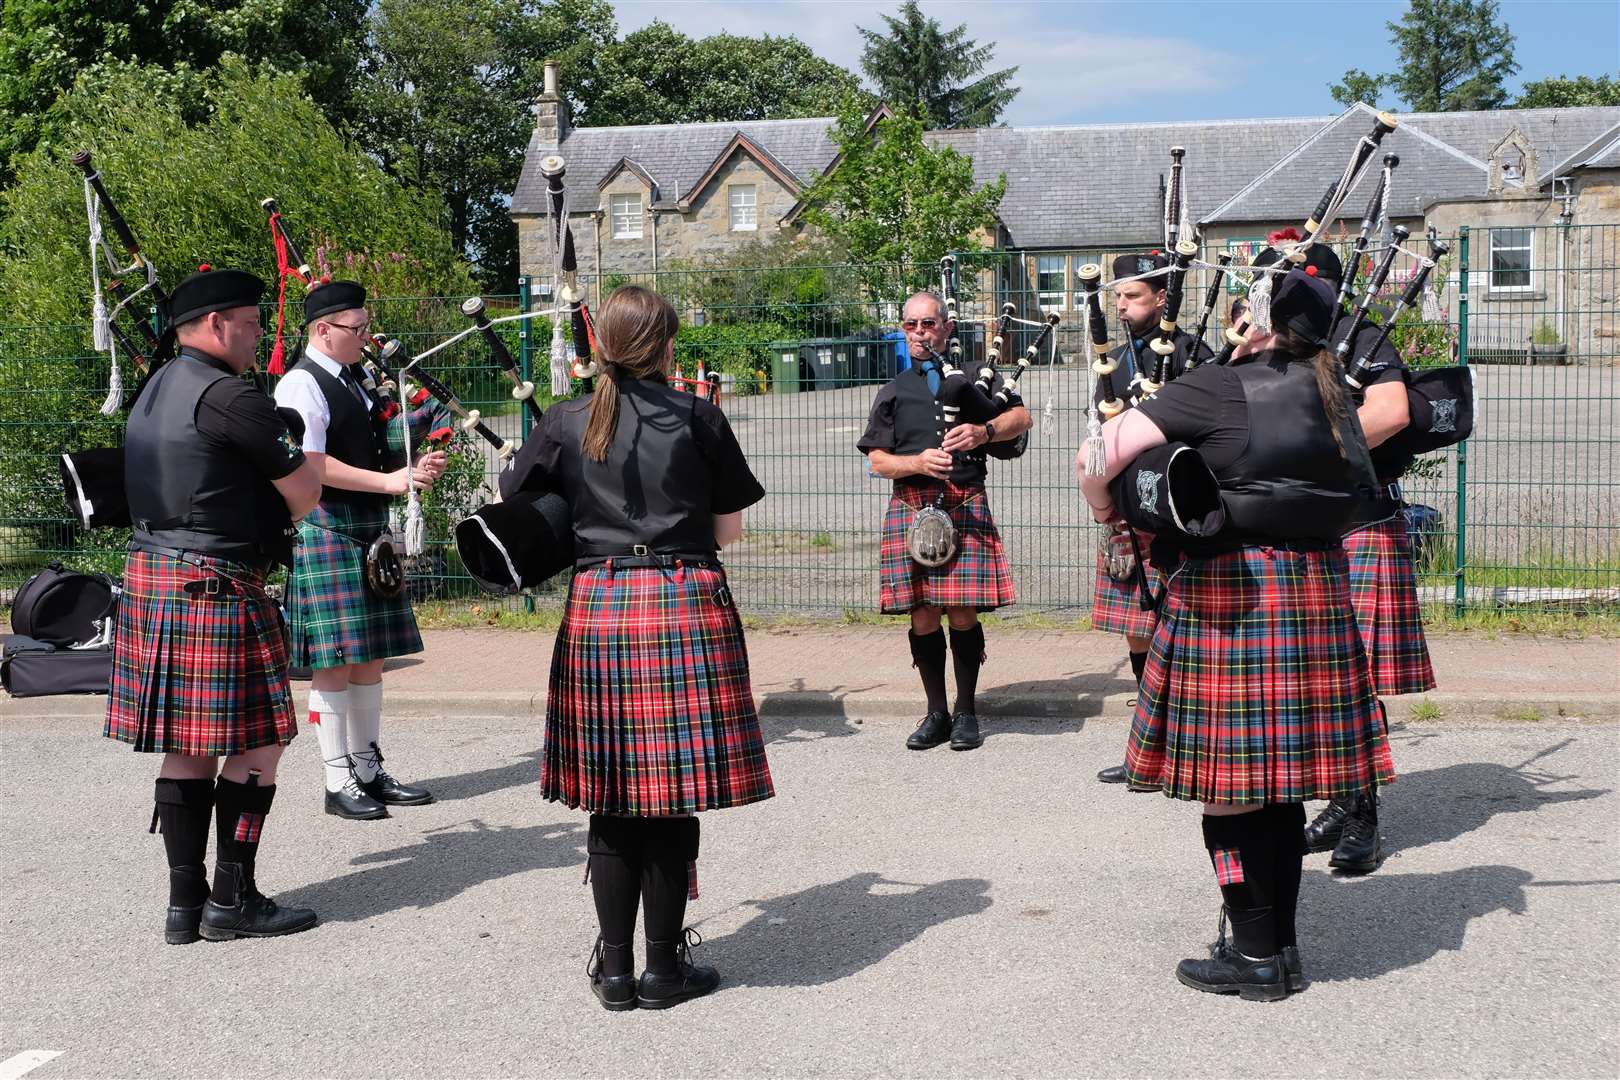 Pipers gave a rousing performance.